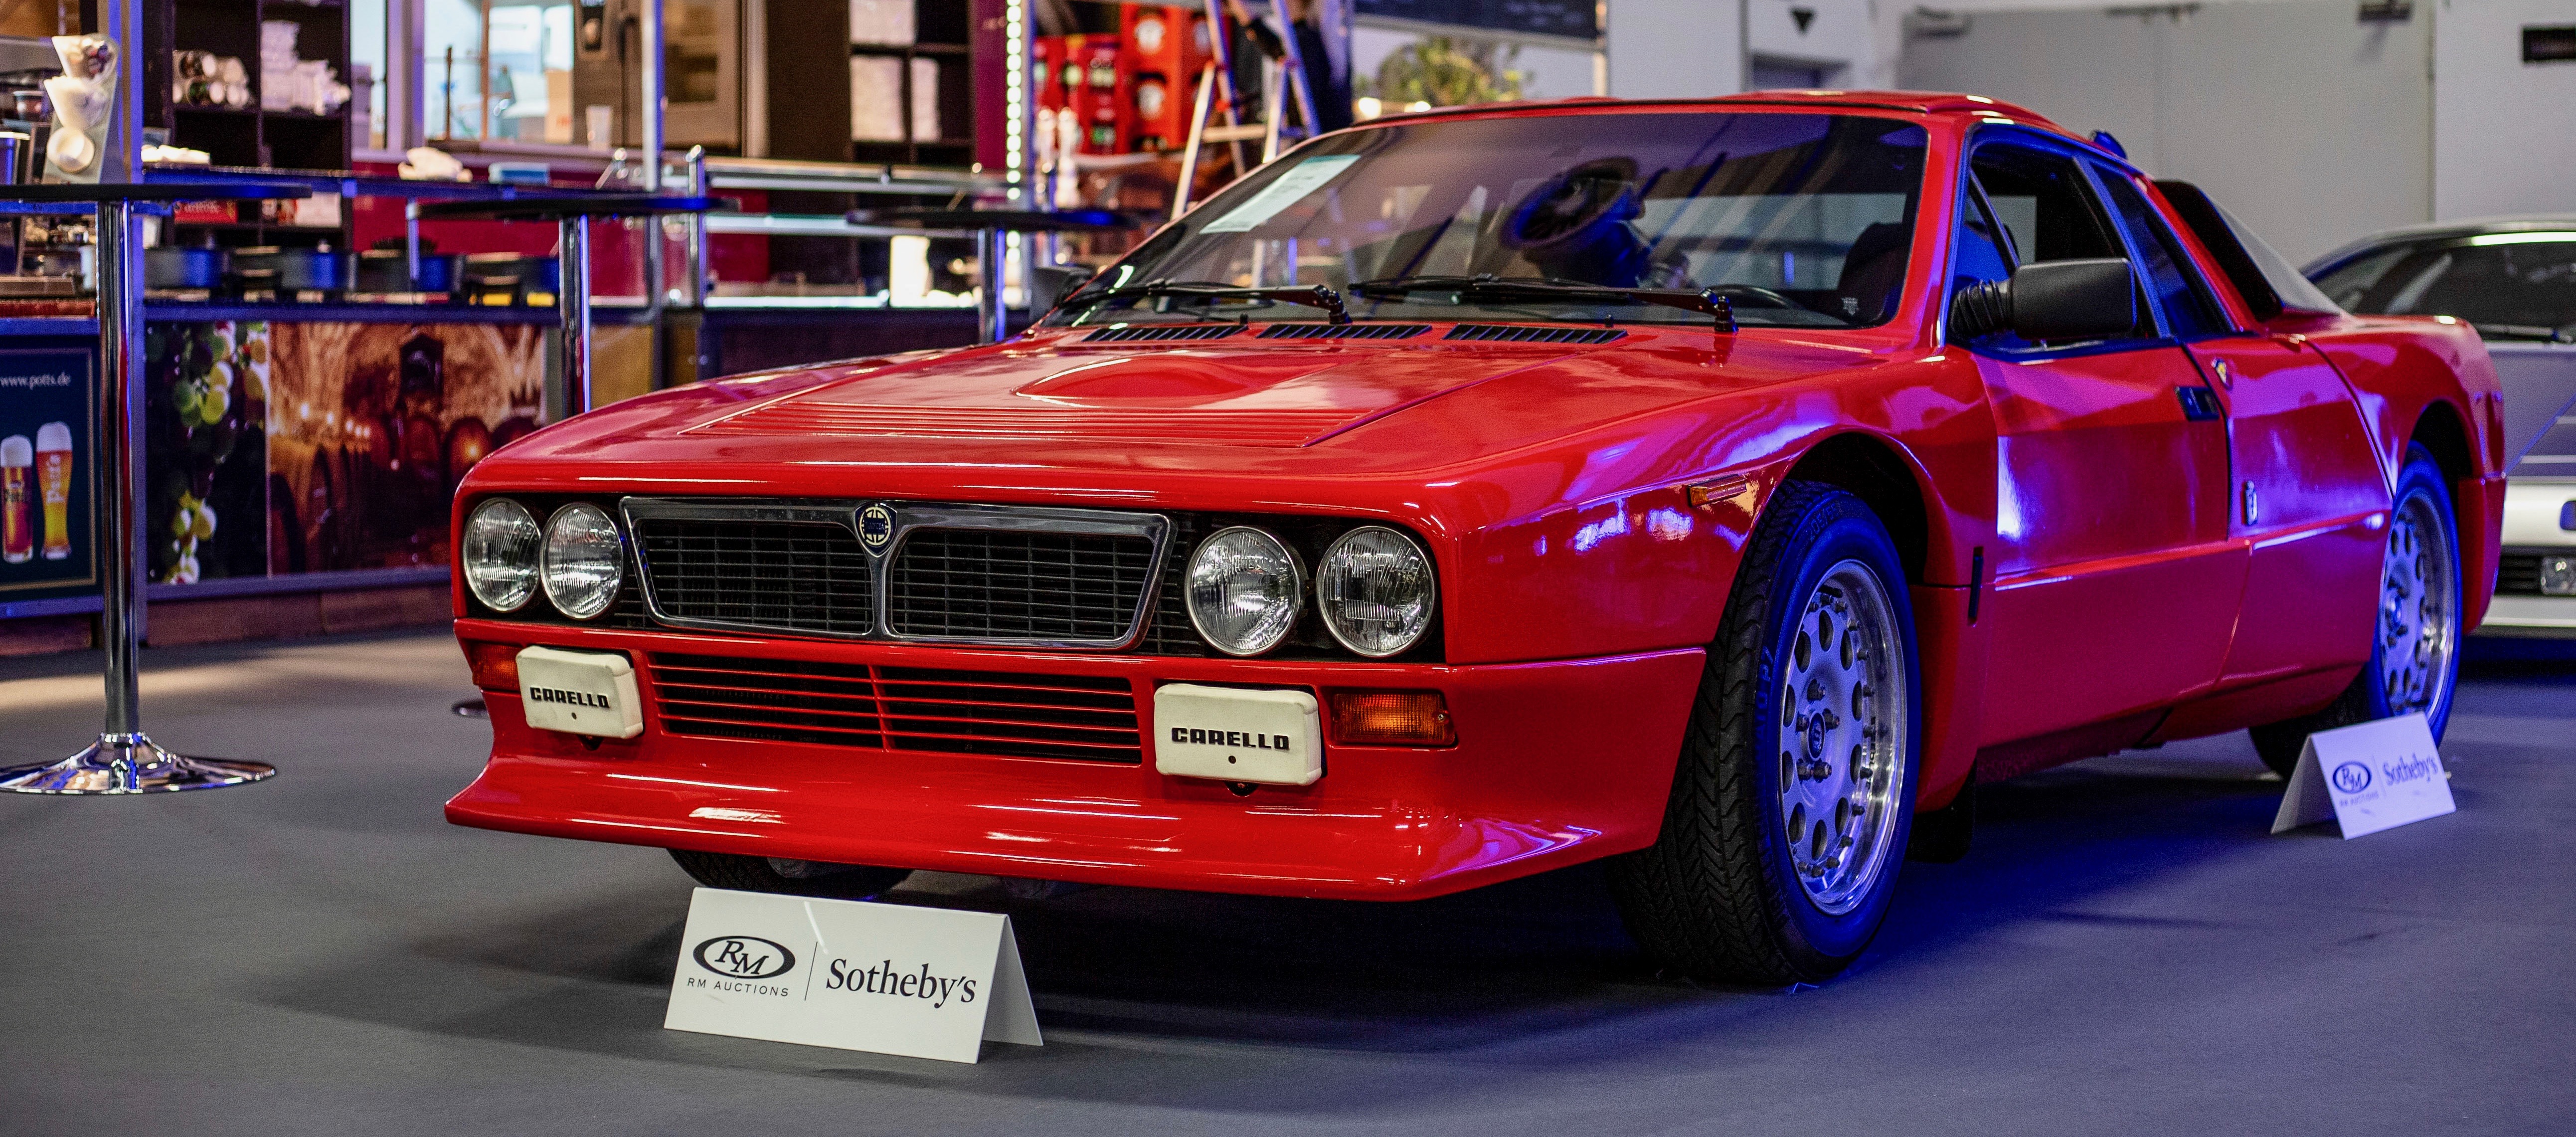 RM Sotheby's, Lancias, Youngtimers stun RM Sotheby’s inaugural German auction, ClassicCars.com Journal